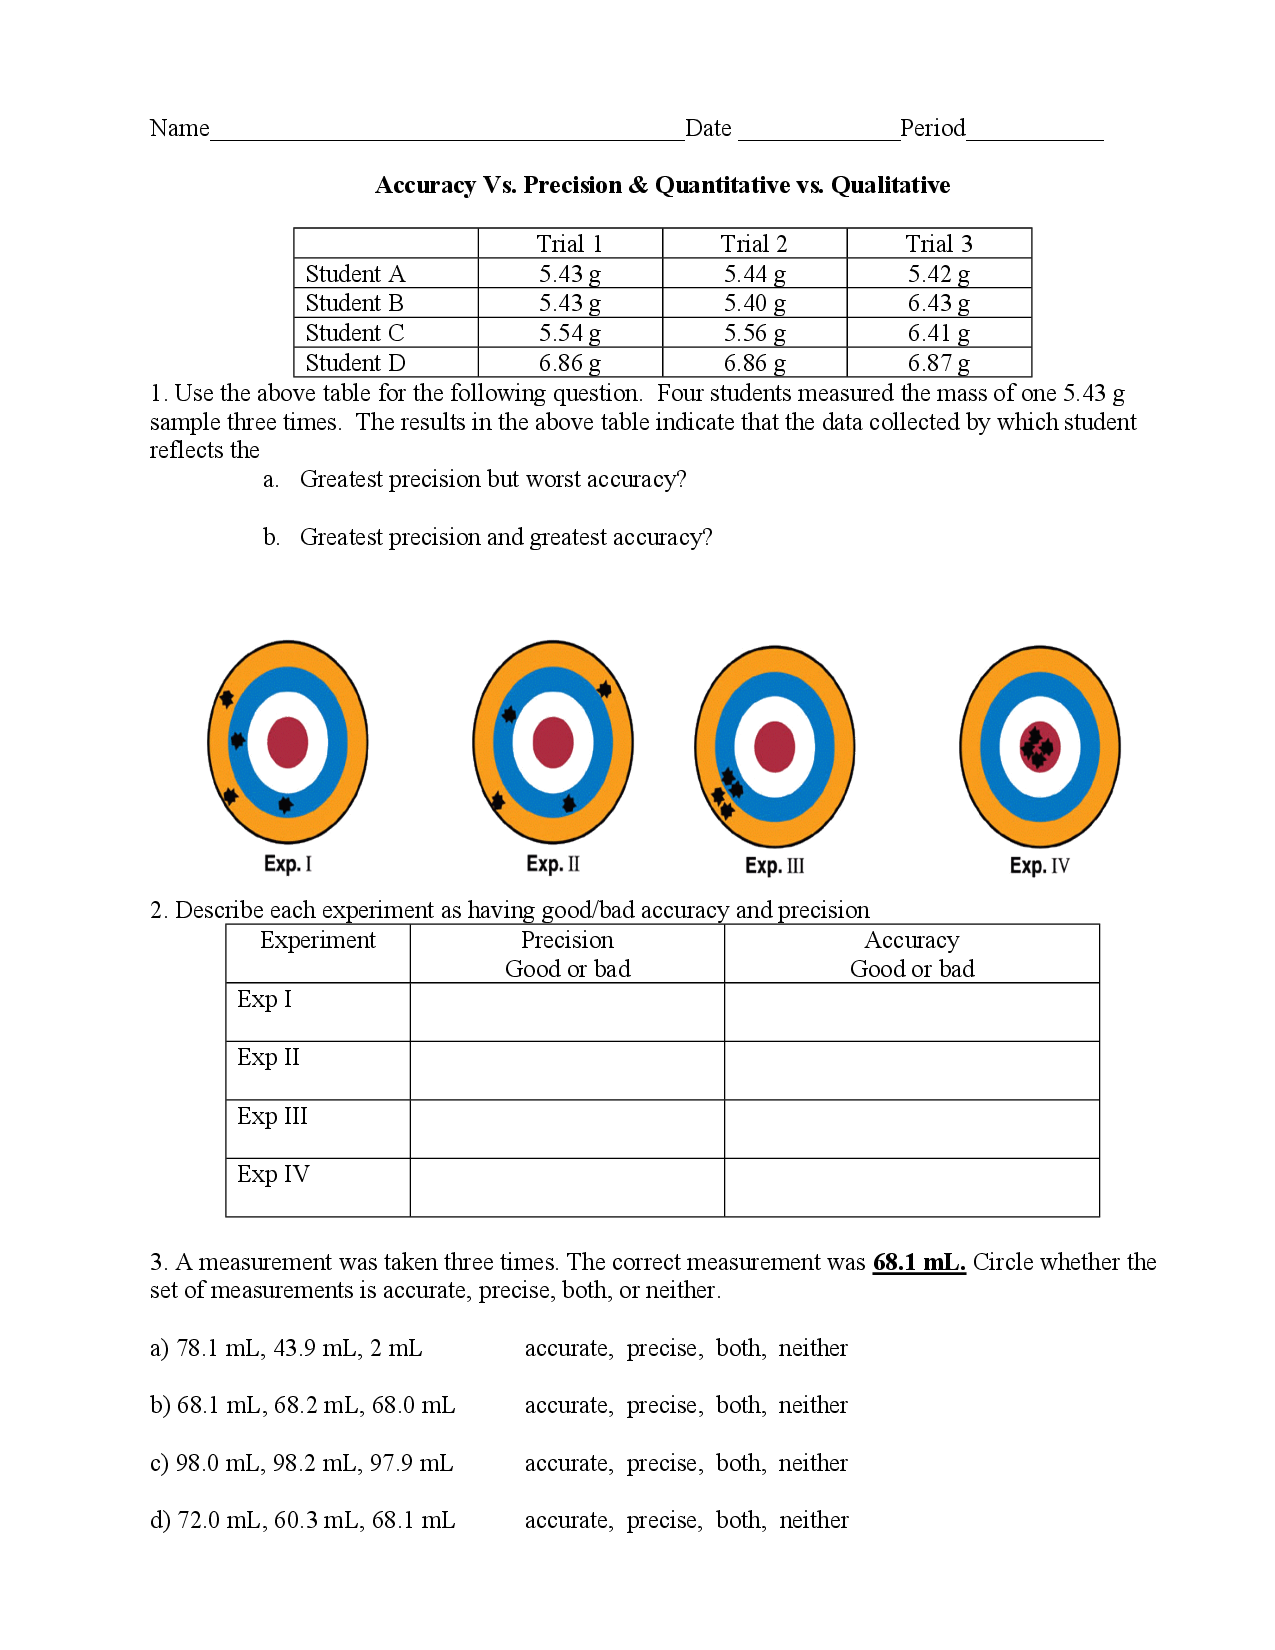 accuracy-precision-worksheet-free-download-goodimg-co